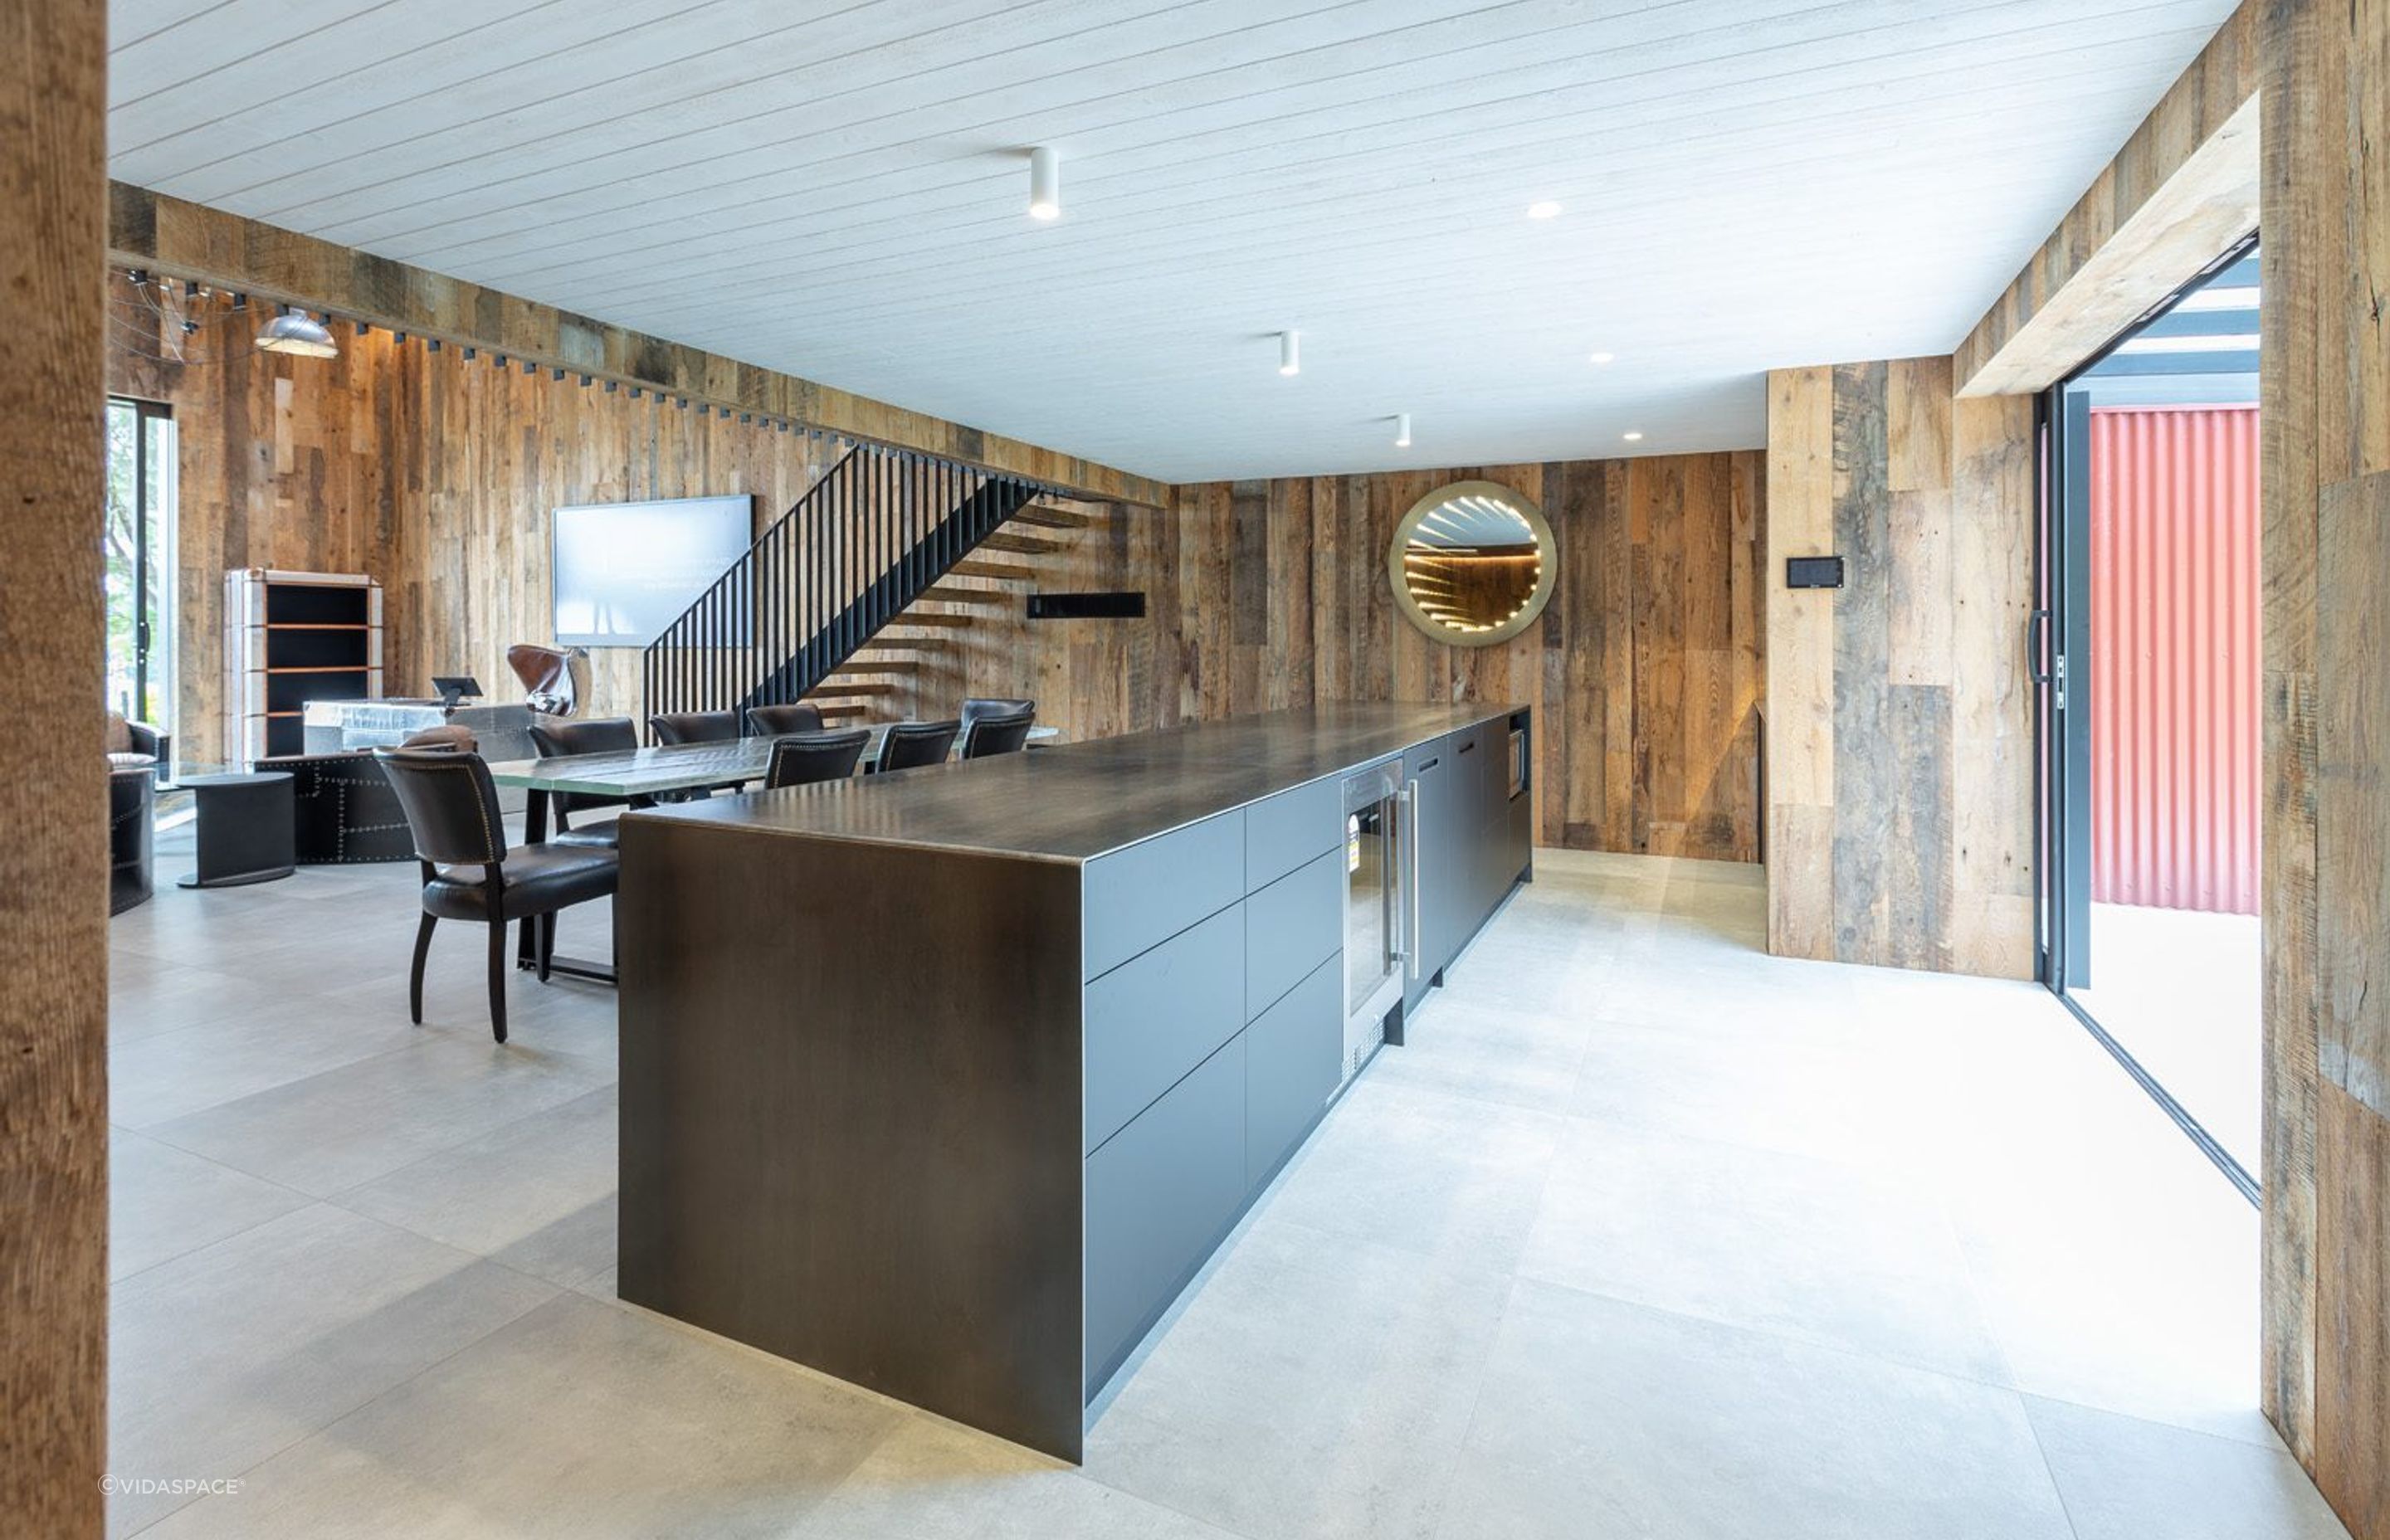 The Harken VidaGroove Timber Wall and Ceiling Panelling is a great addition to any interior space.